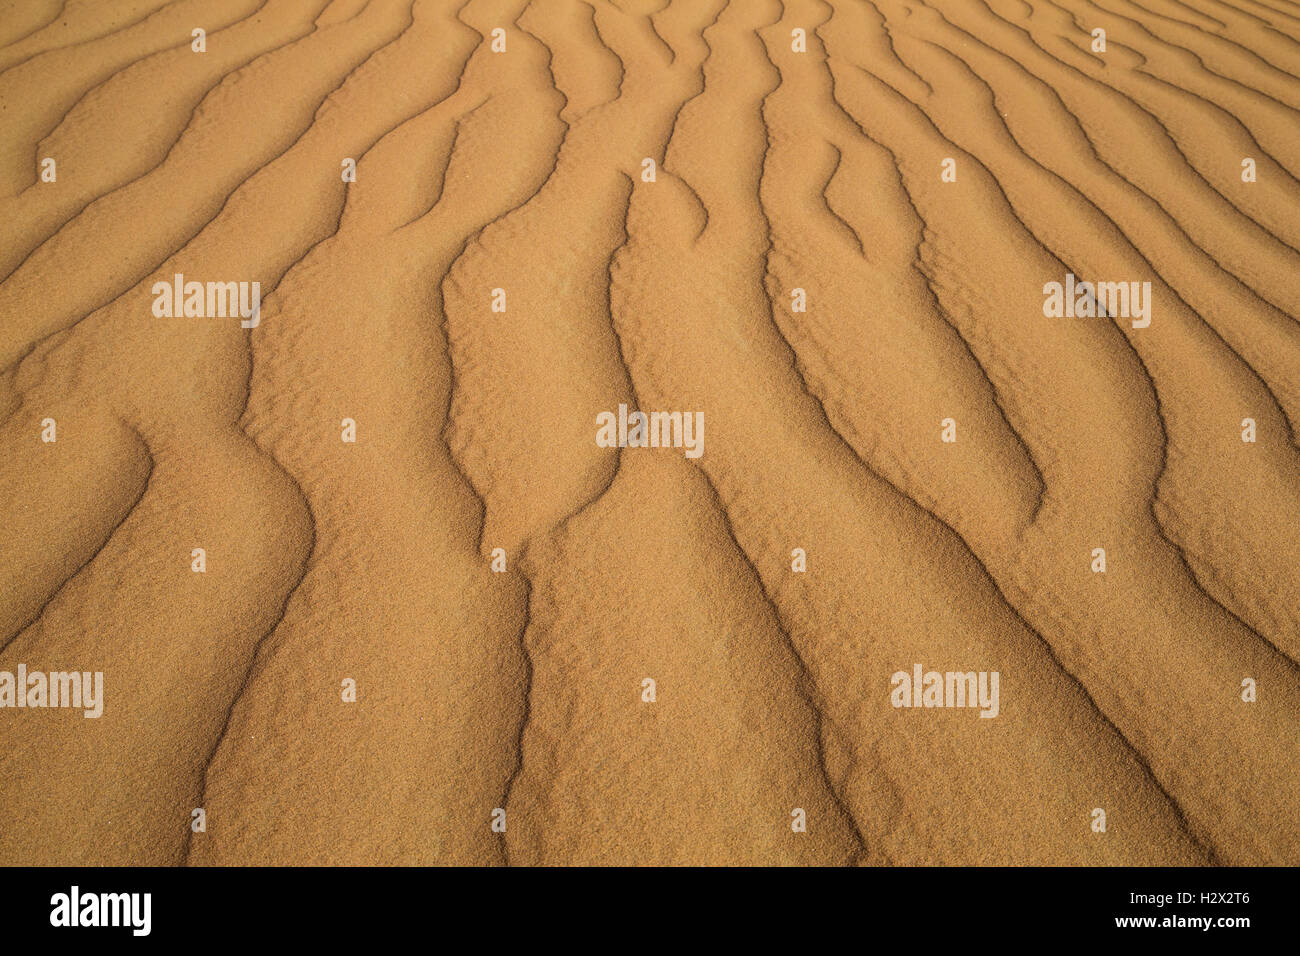 Pattern of sand dunes in the Emty Quarter desert that is covering large area in UAE, KSA and Oman Stock Photo